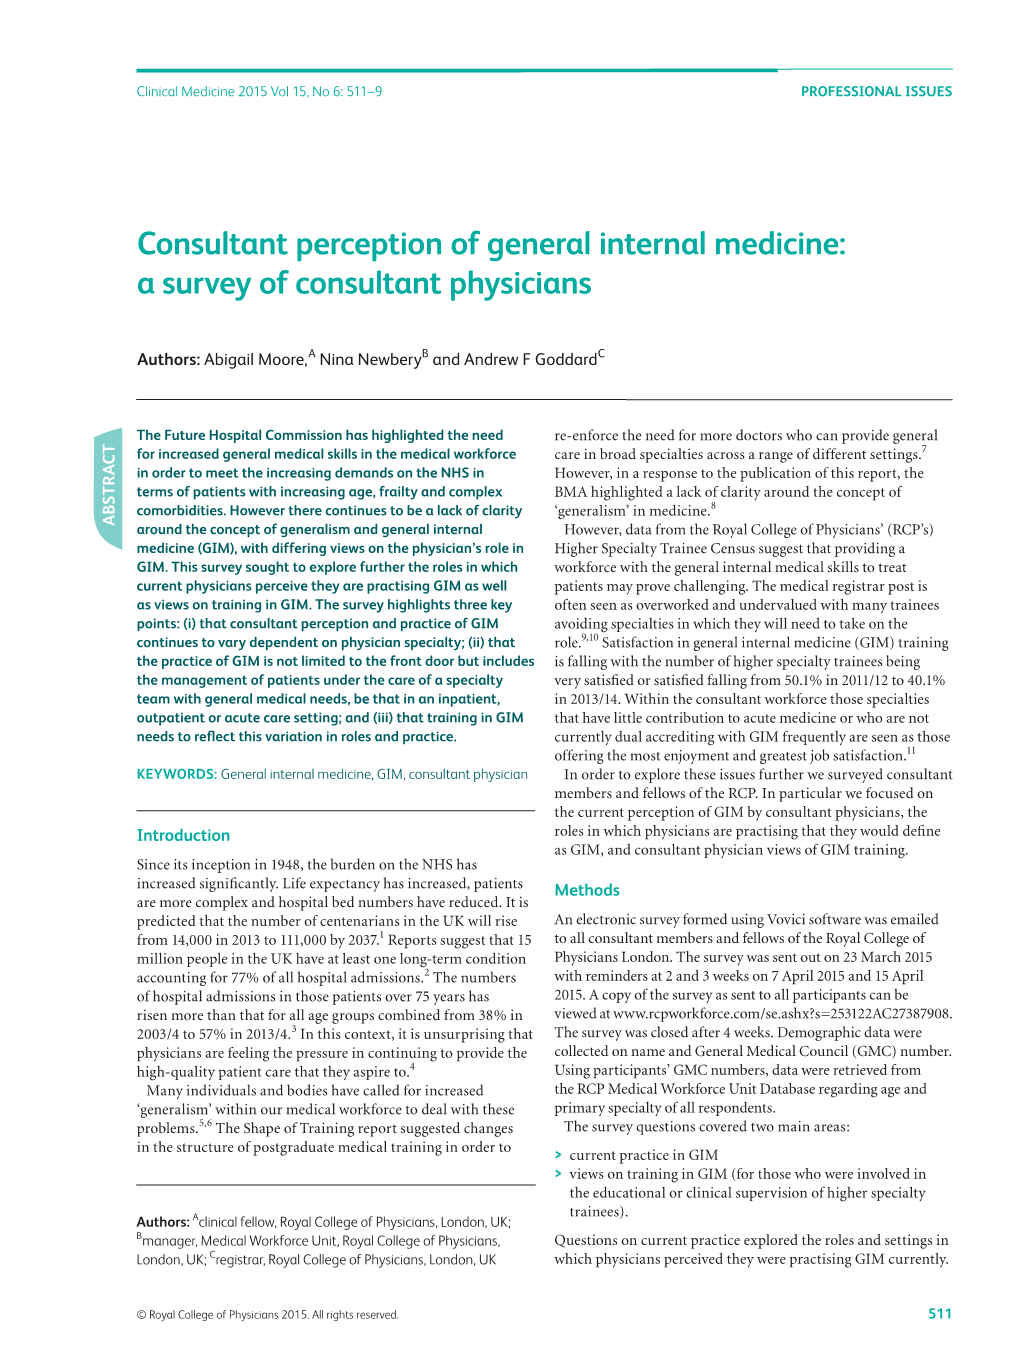 Consultant Perception of General Internal Medicine: a Survey of Consultant Physicians